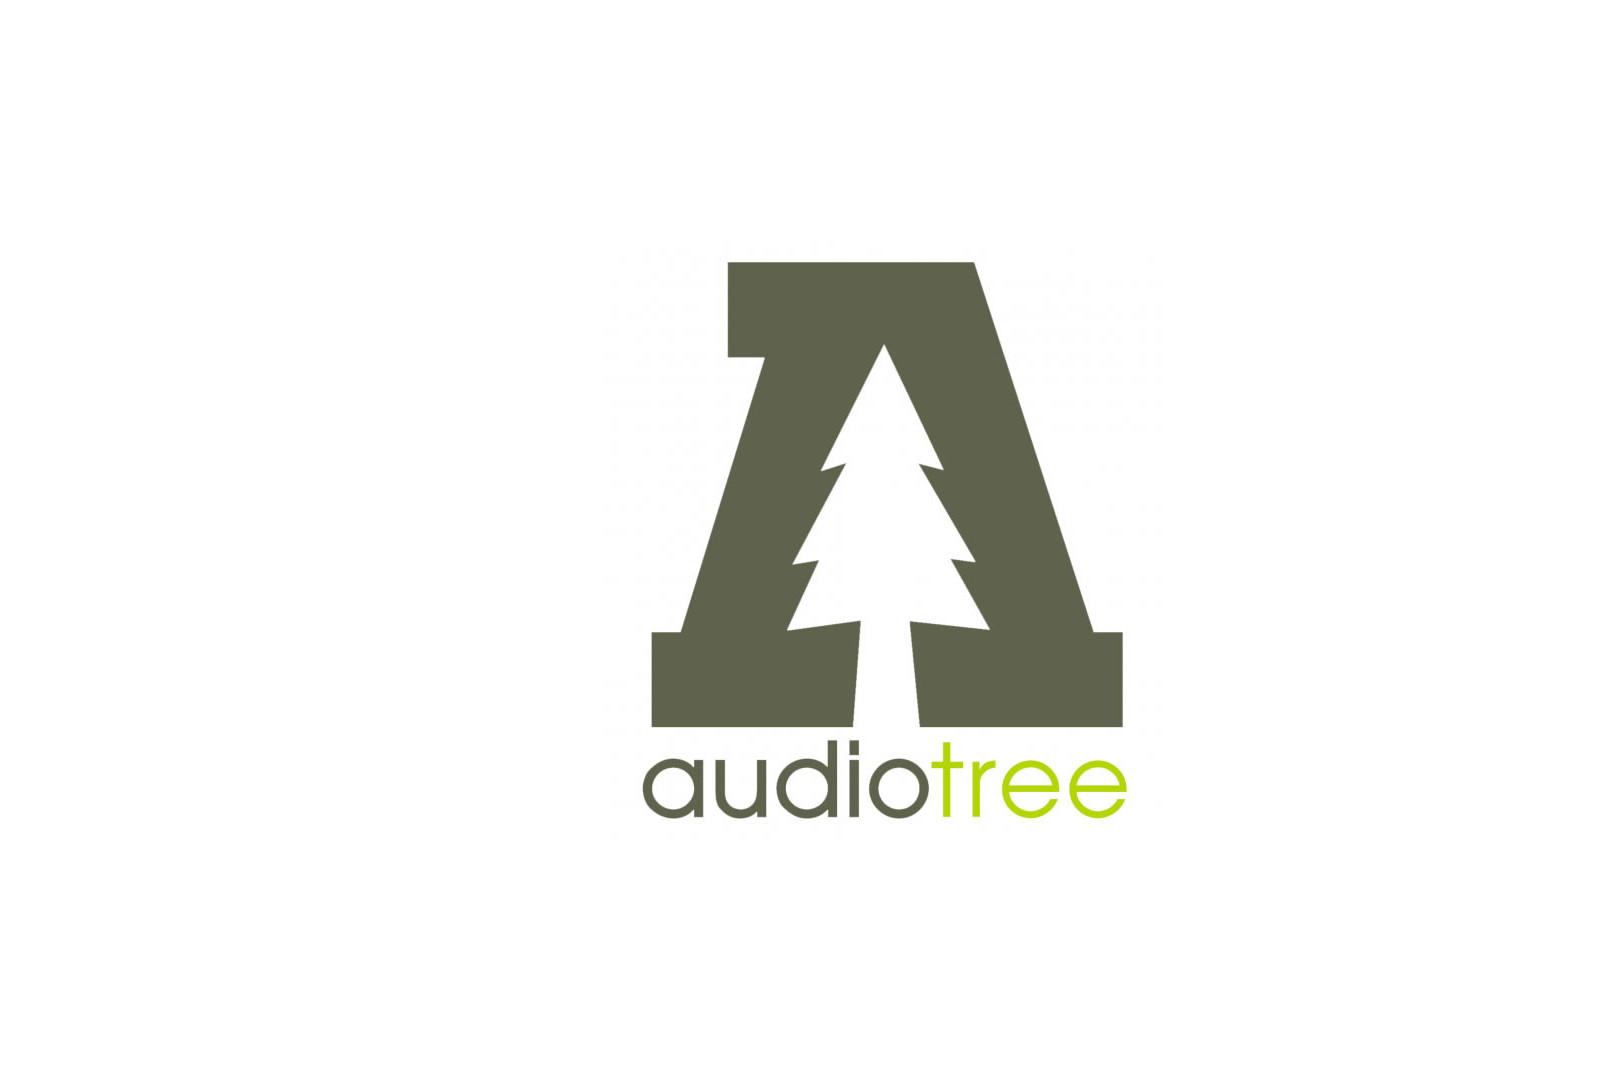 Audiotree owner and wife accused of taking hidden video of nannies undressing